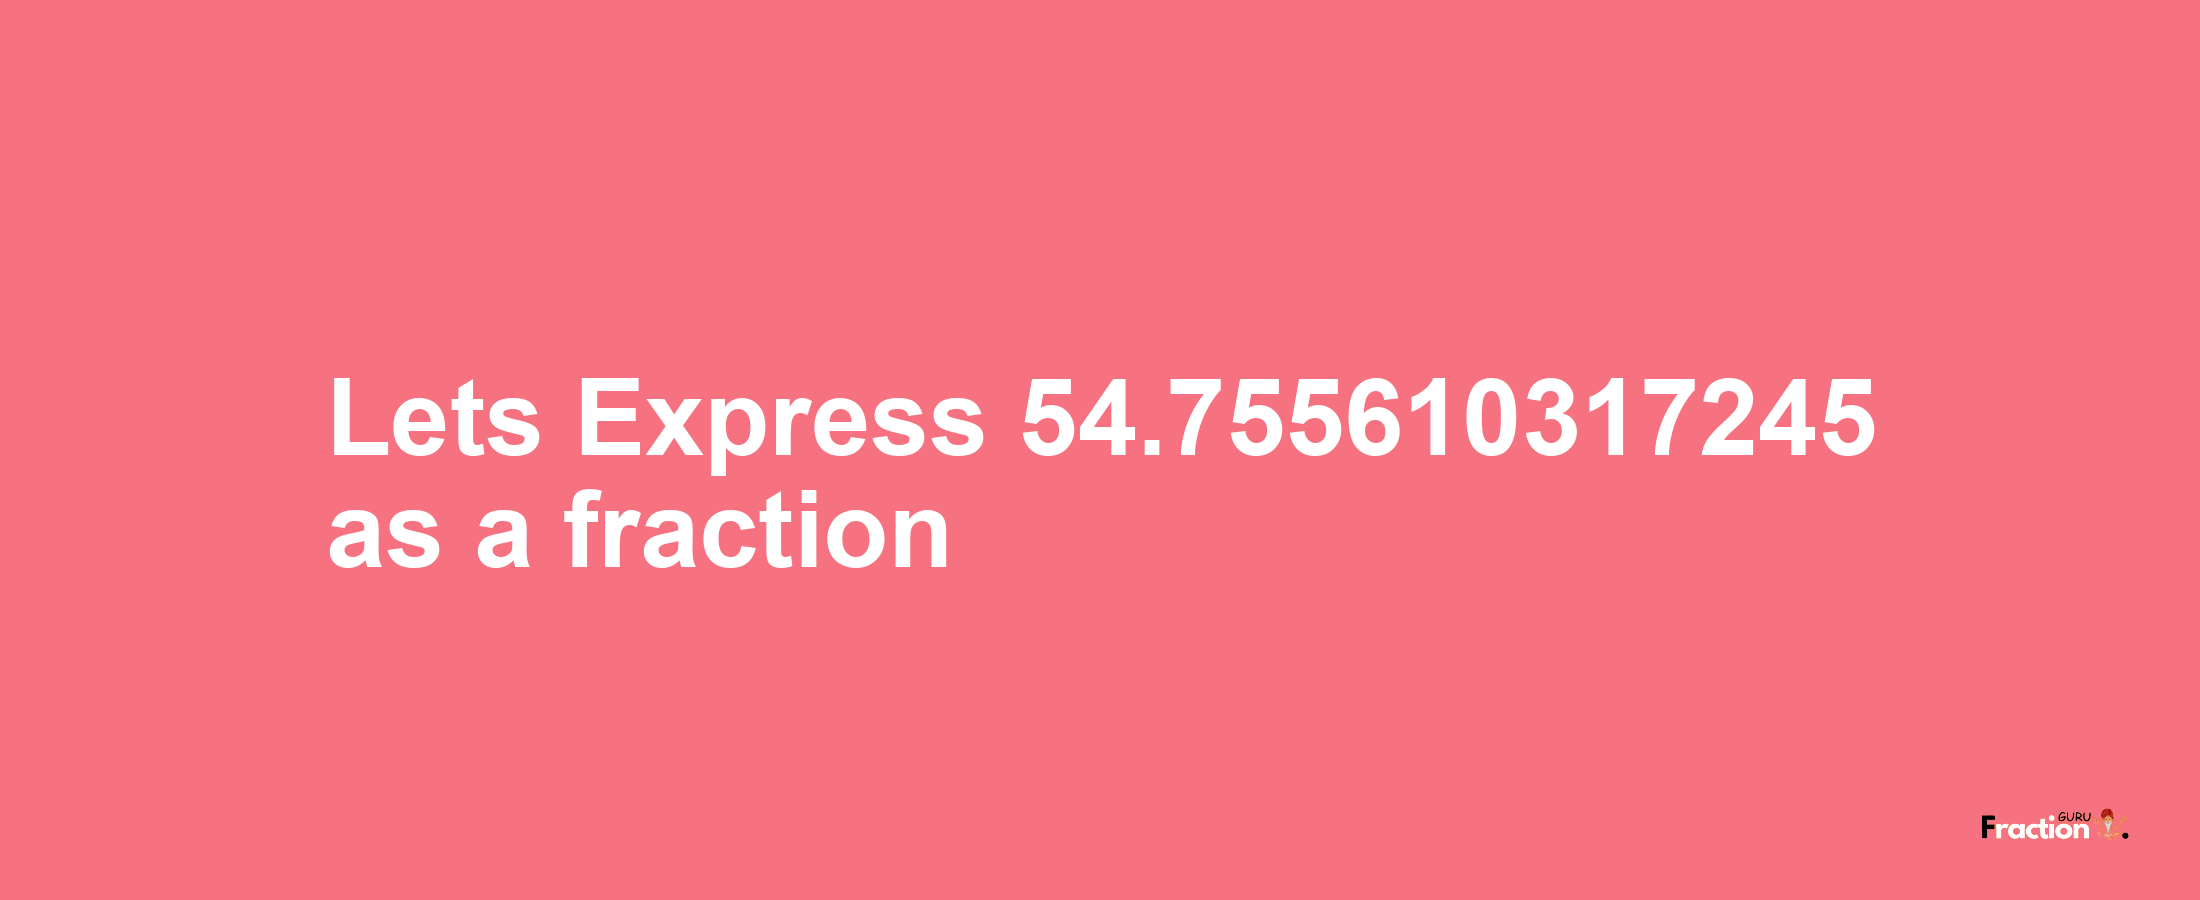 Lets Express 54.755610317245 as afraction